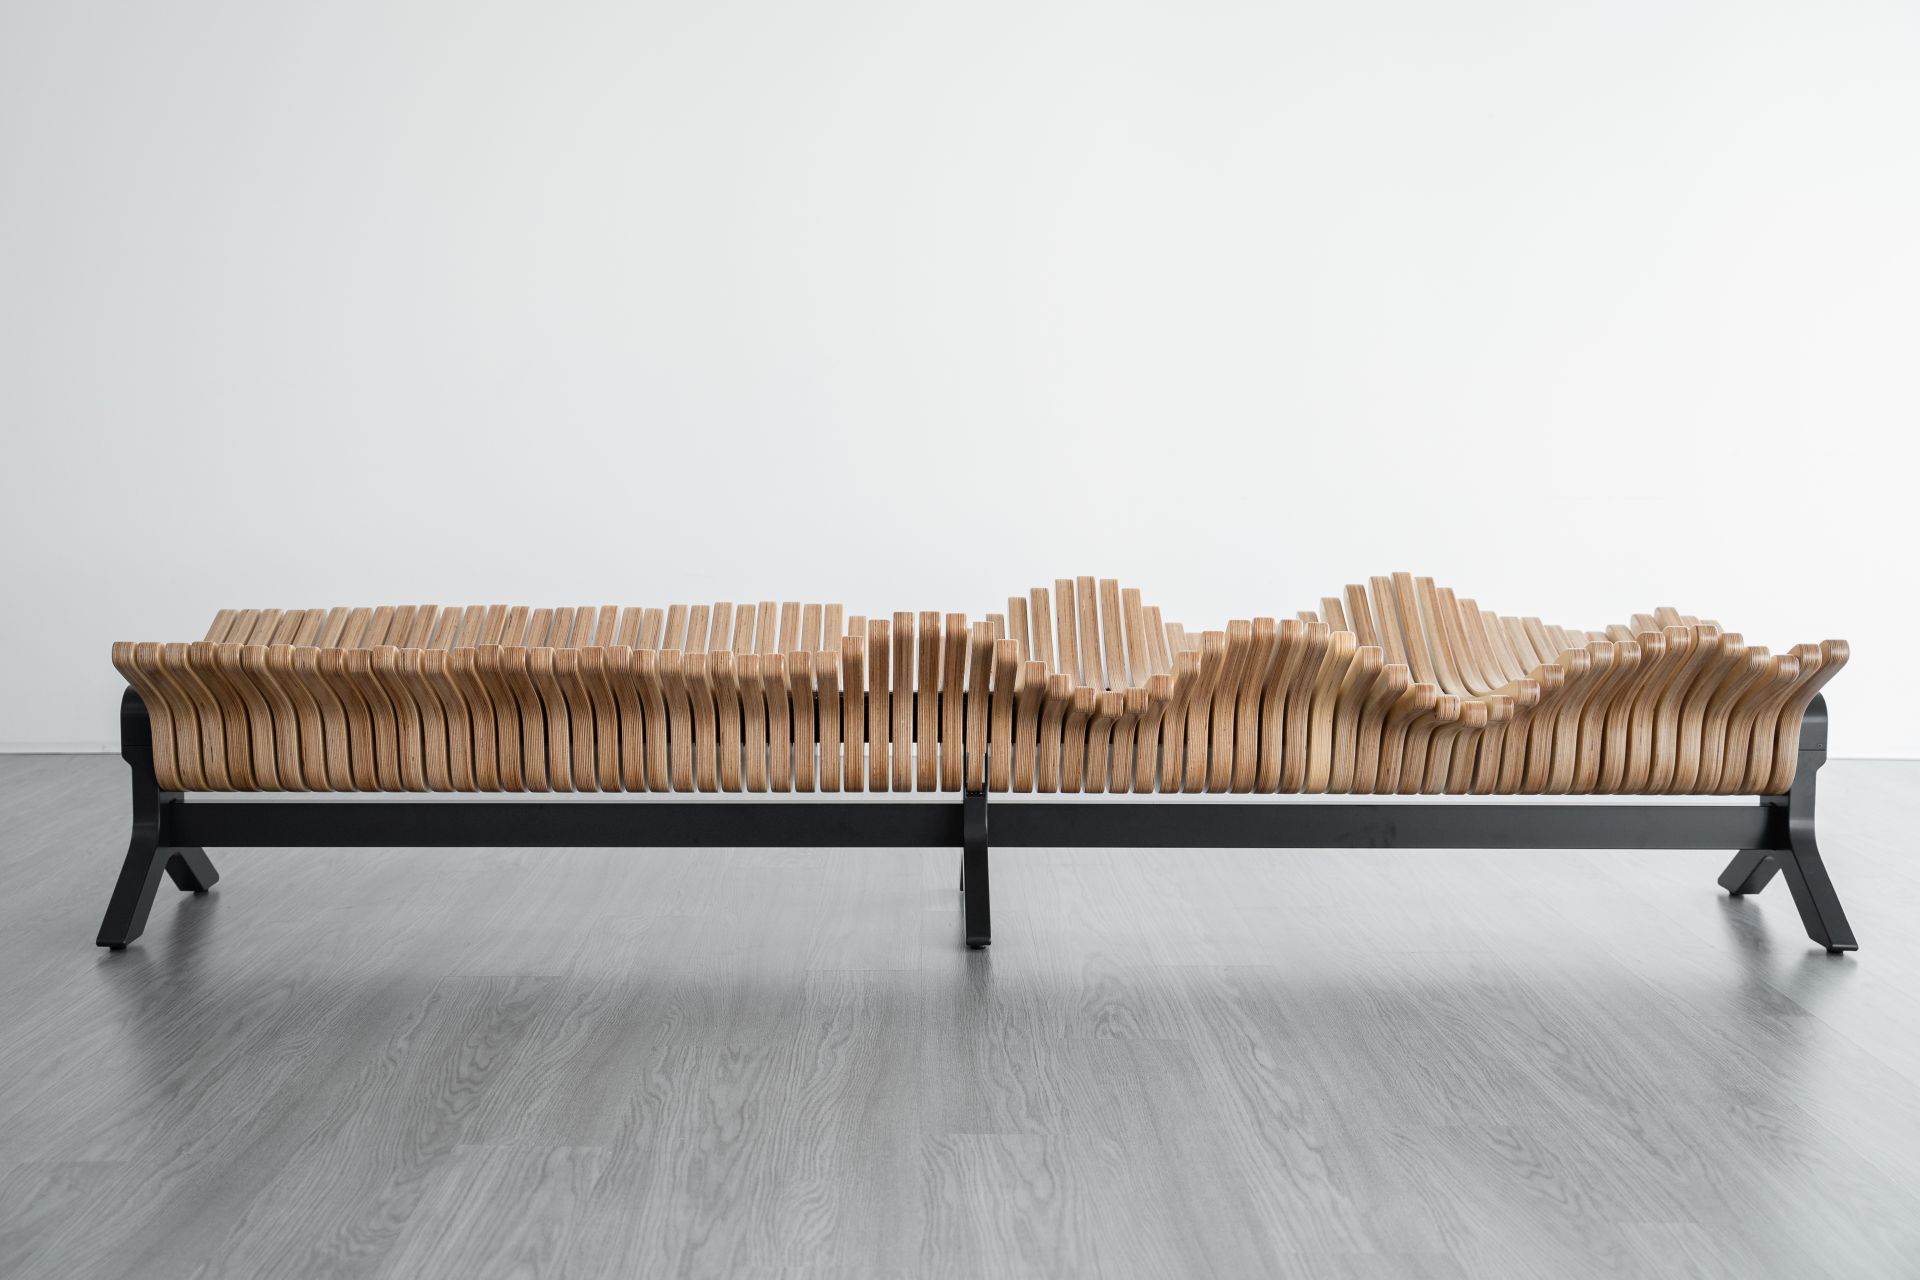 Surfbench bench with movable seat ribs